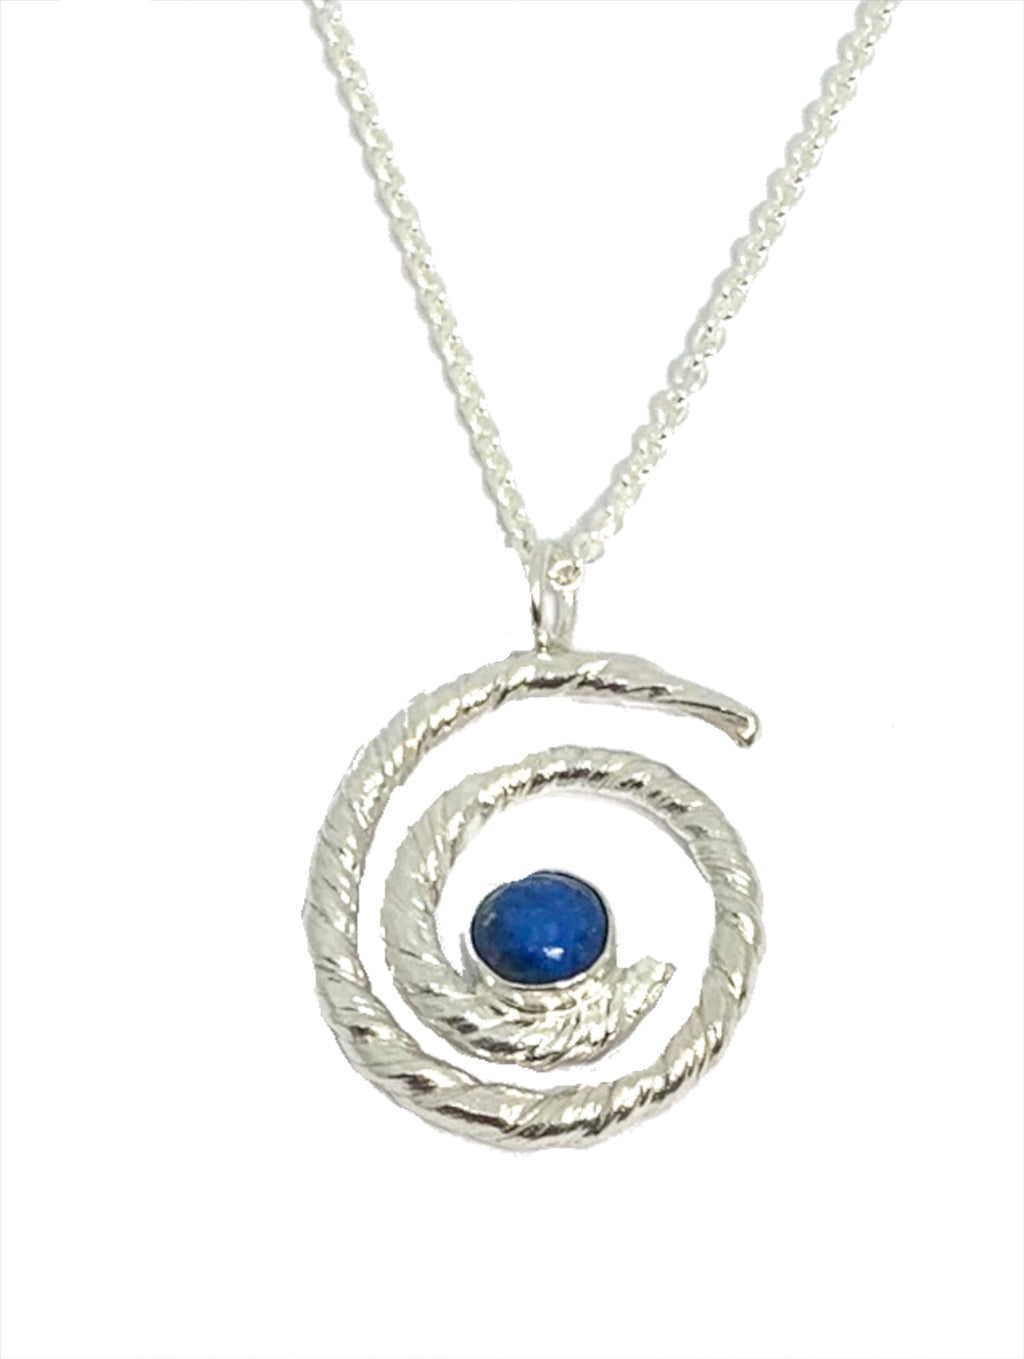 Lapis Lazuli Spiral Pendant Necklace in Sterling Silver